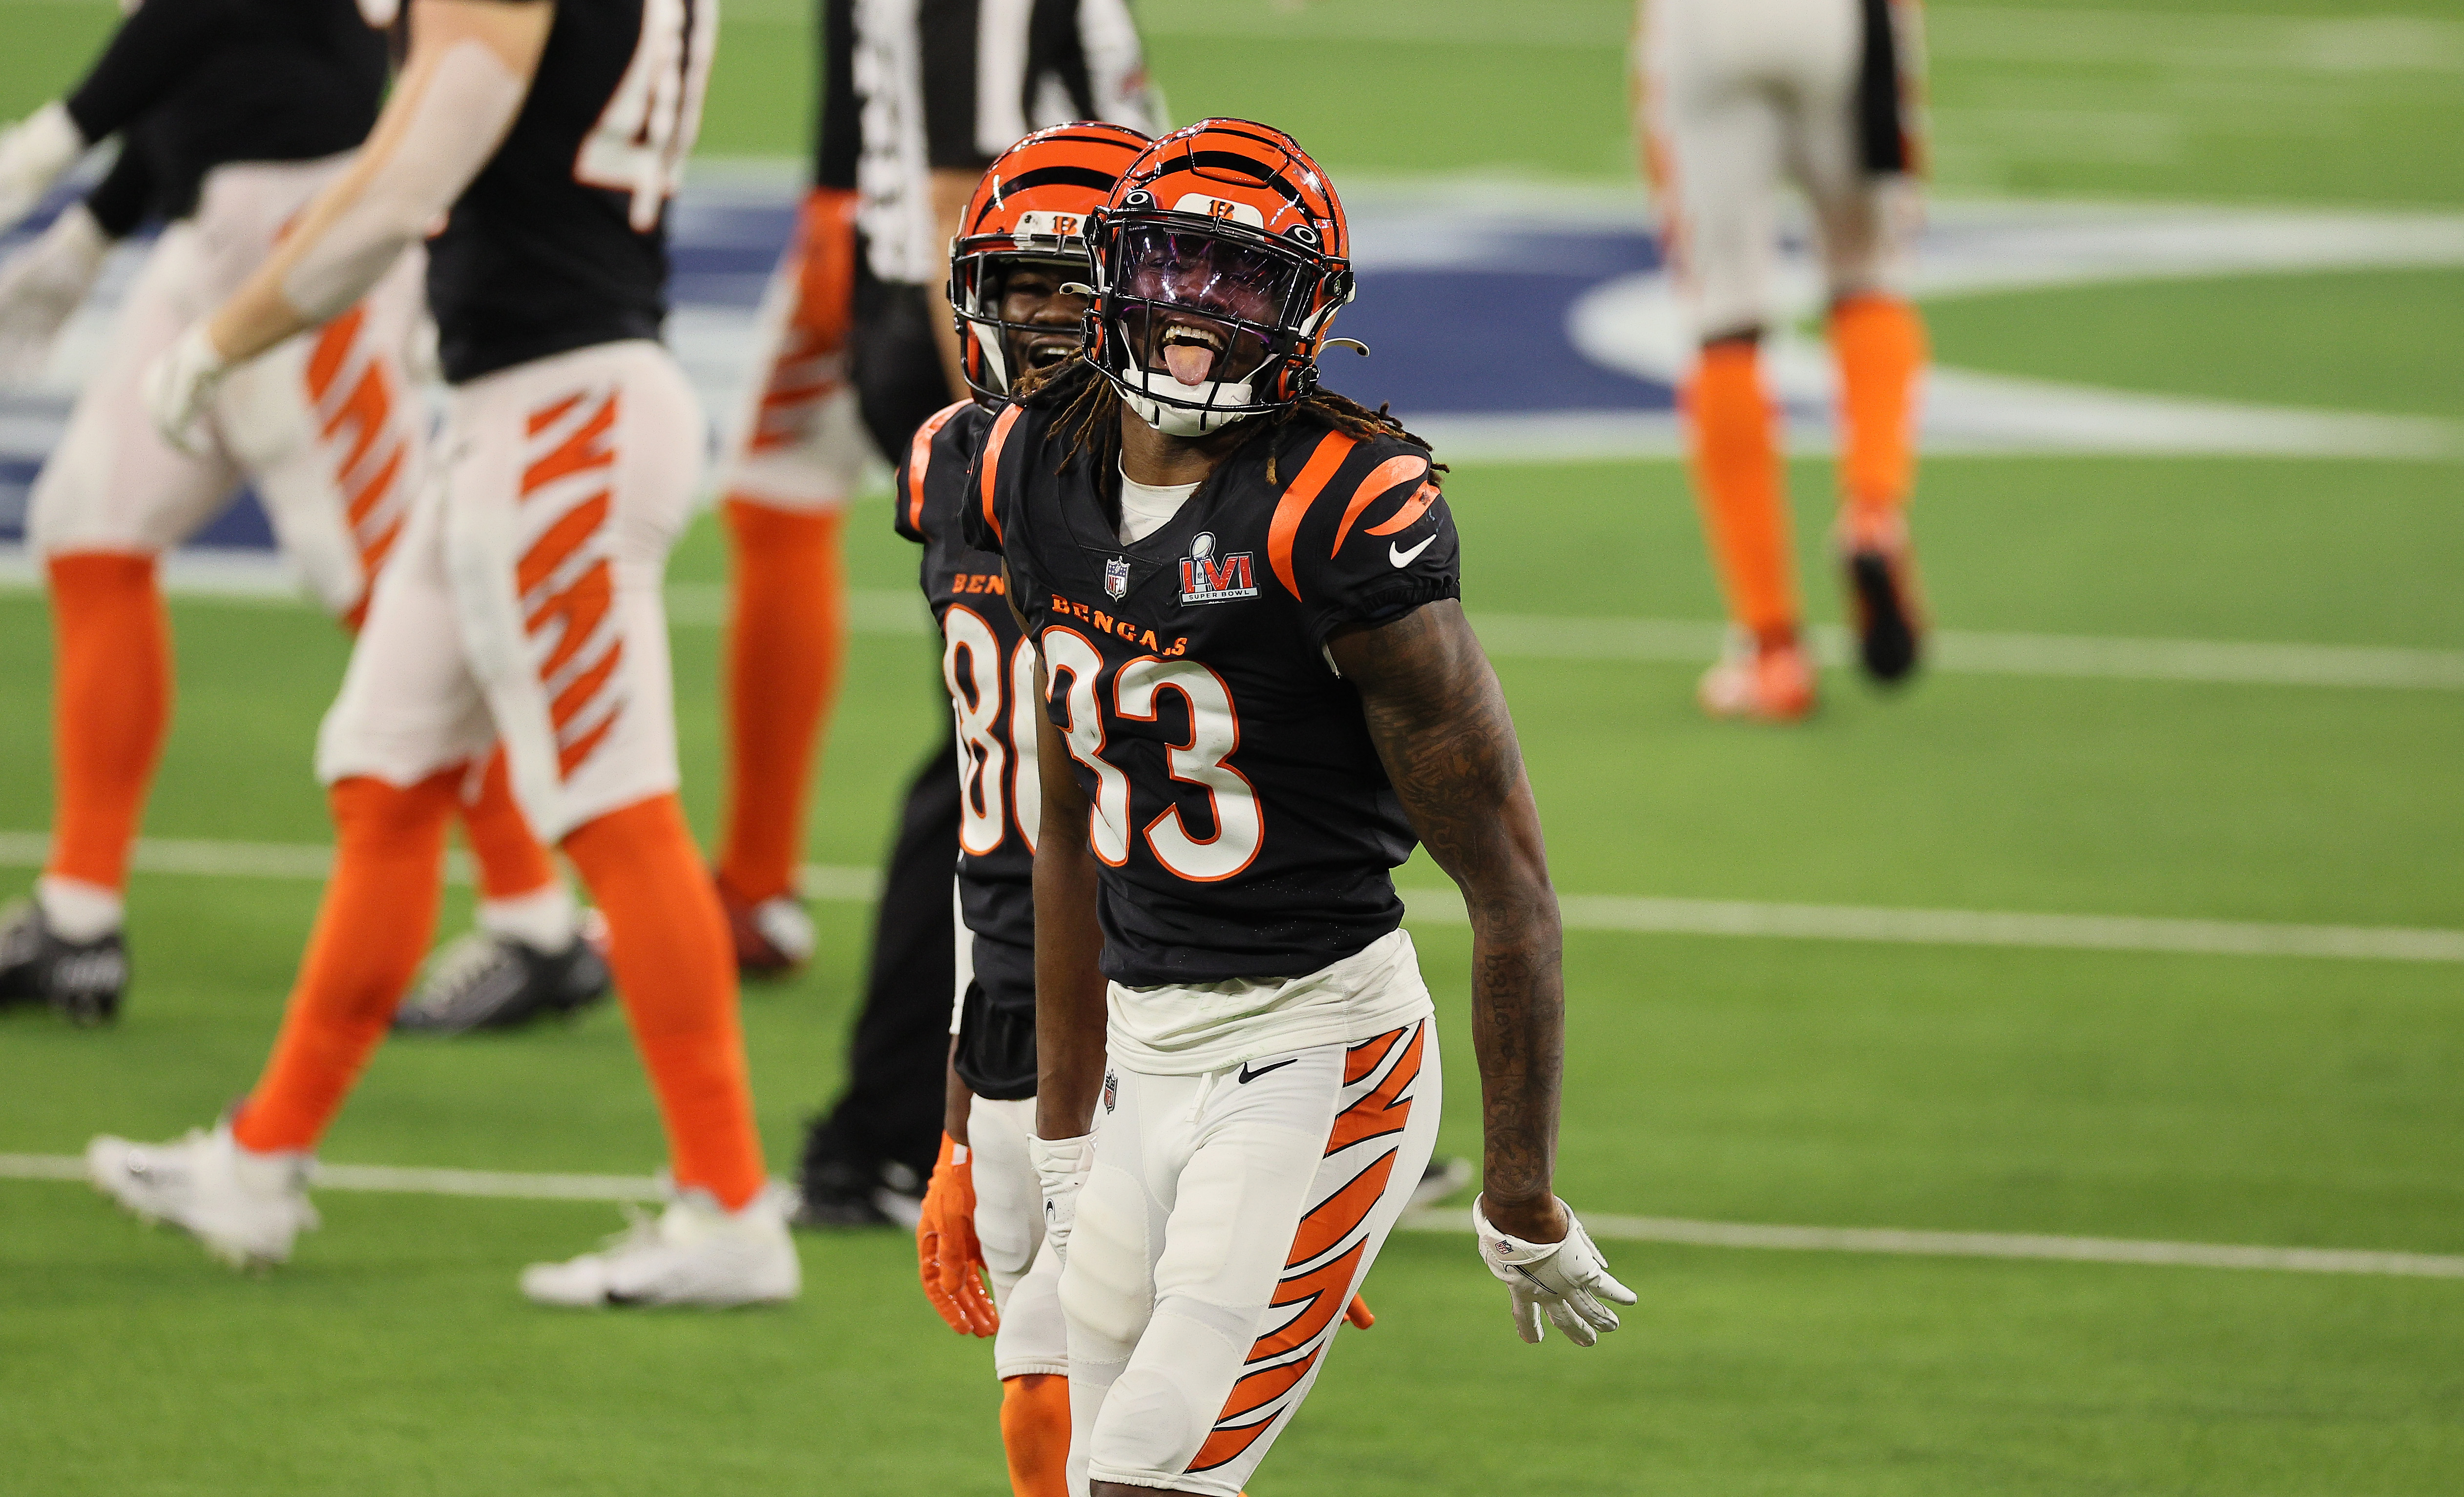 Tre Flowers #33 of the Cincinnati Bengals against the Los Angeles Rams during the Super Bowl at SoFi Stadium on February 13, 2022 in Inglewood, California.